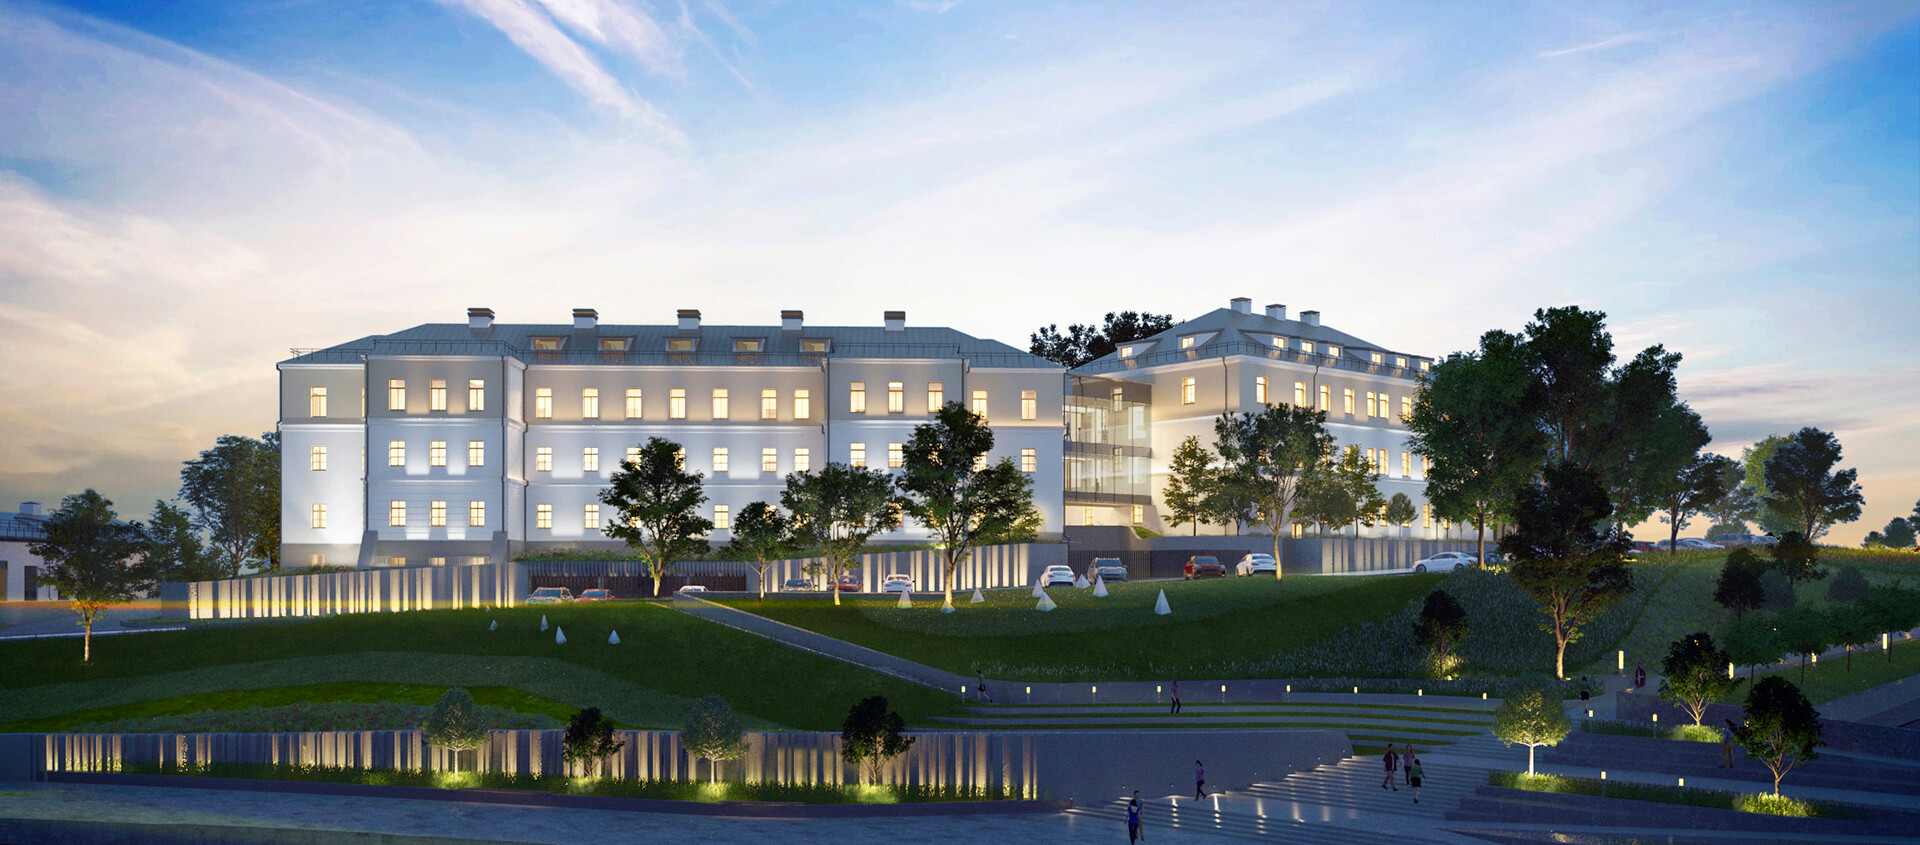 GRAND HOTEL MINSK <br> RECONSTRUCTION OF HISTORICAL BUILDINGS